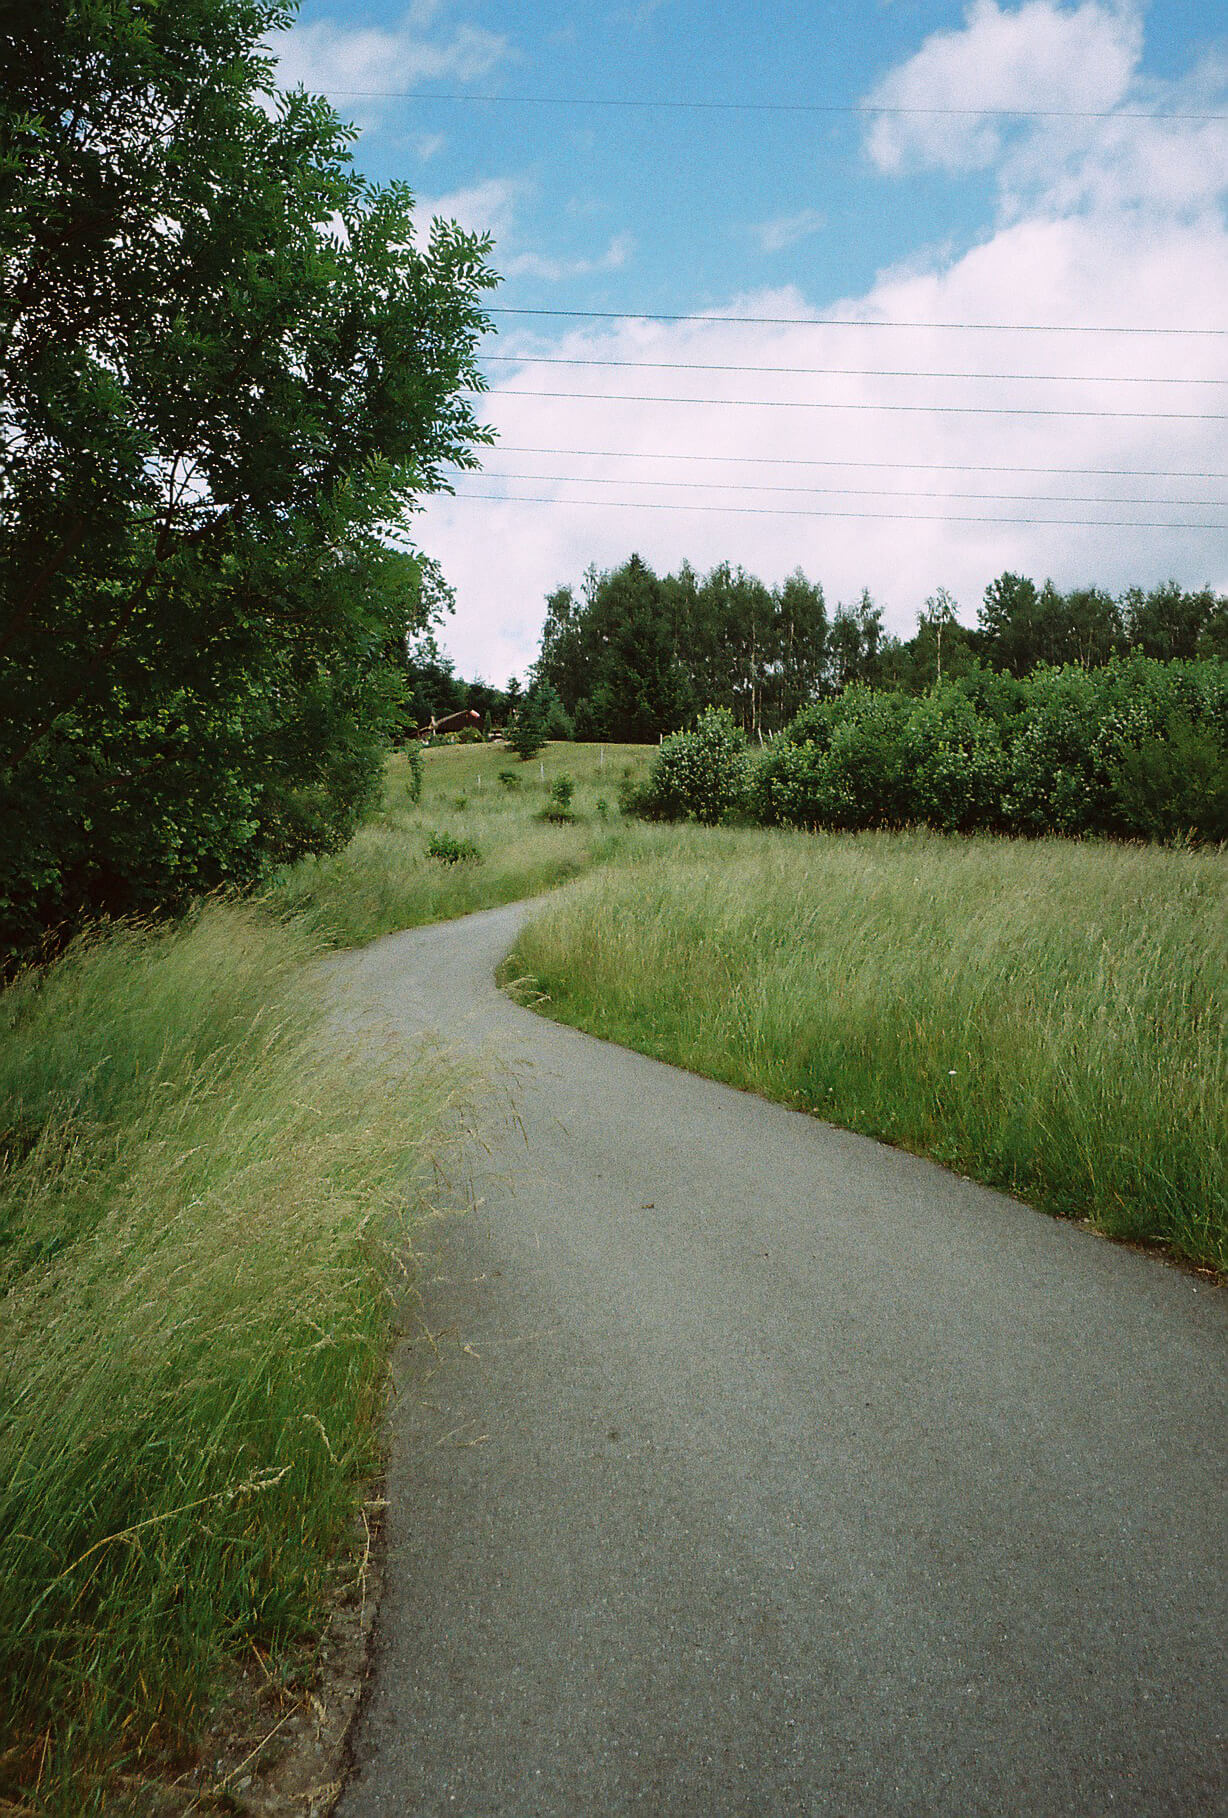 In the picture there is a winding, asphalt, narrow road that turns between trees and meadows into some nice place